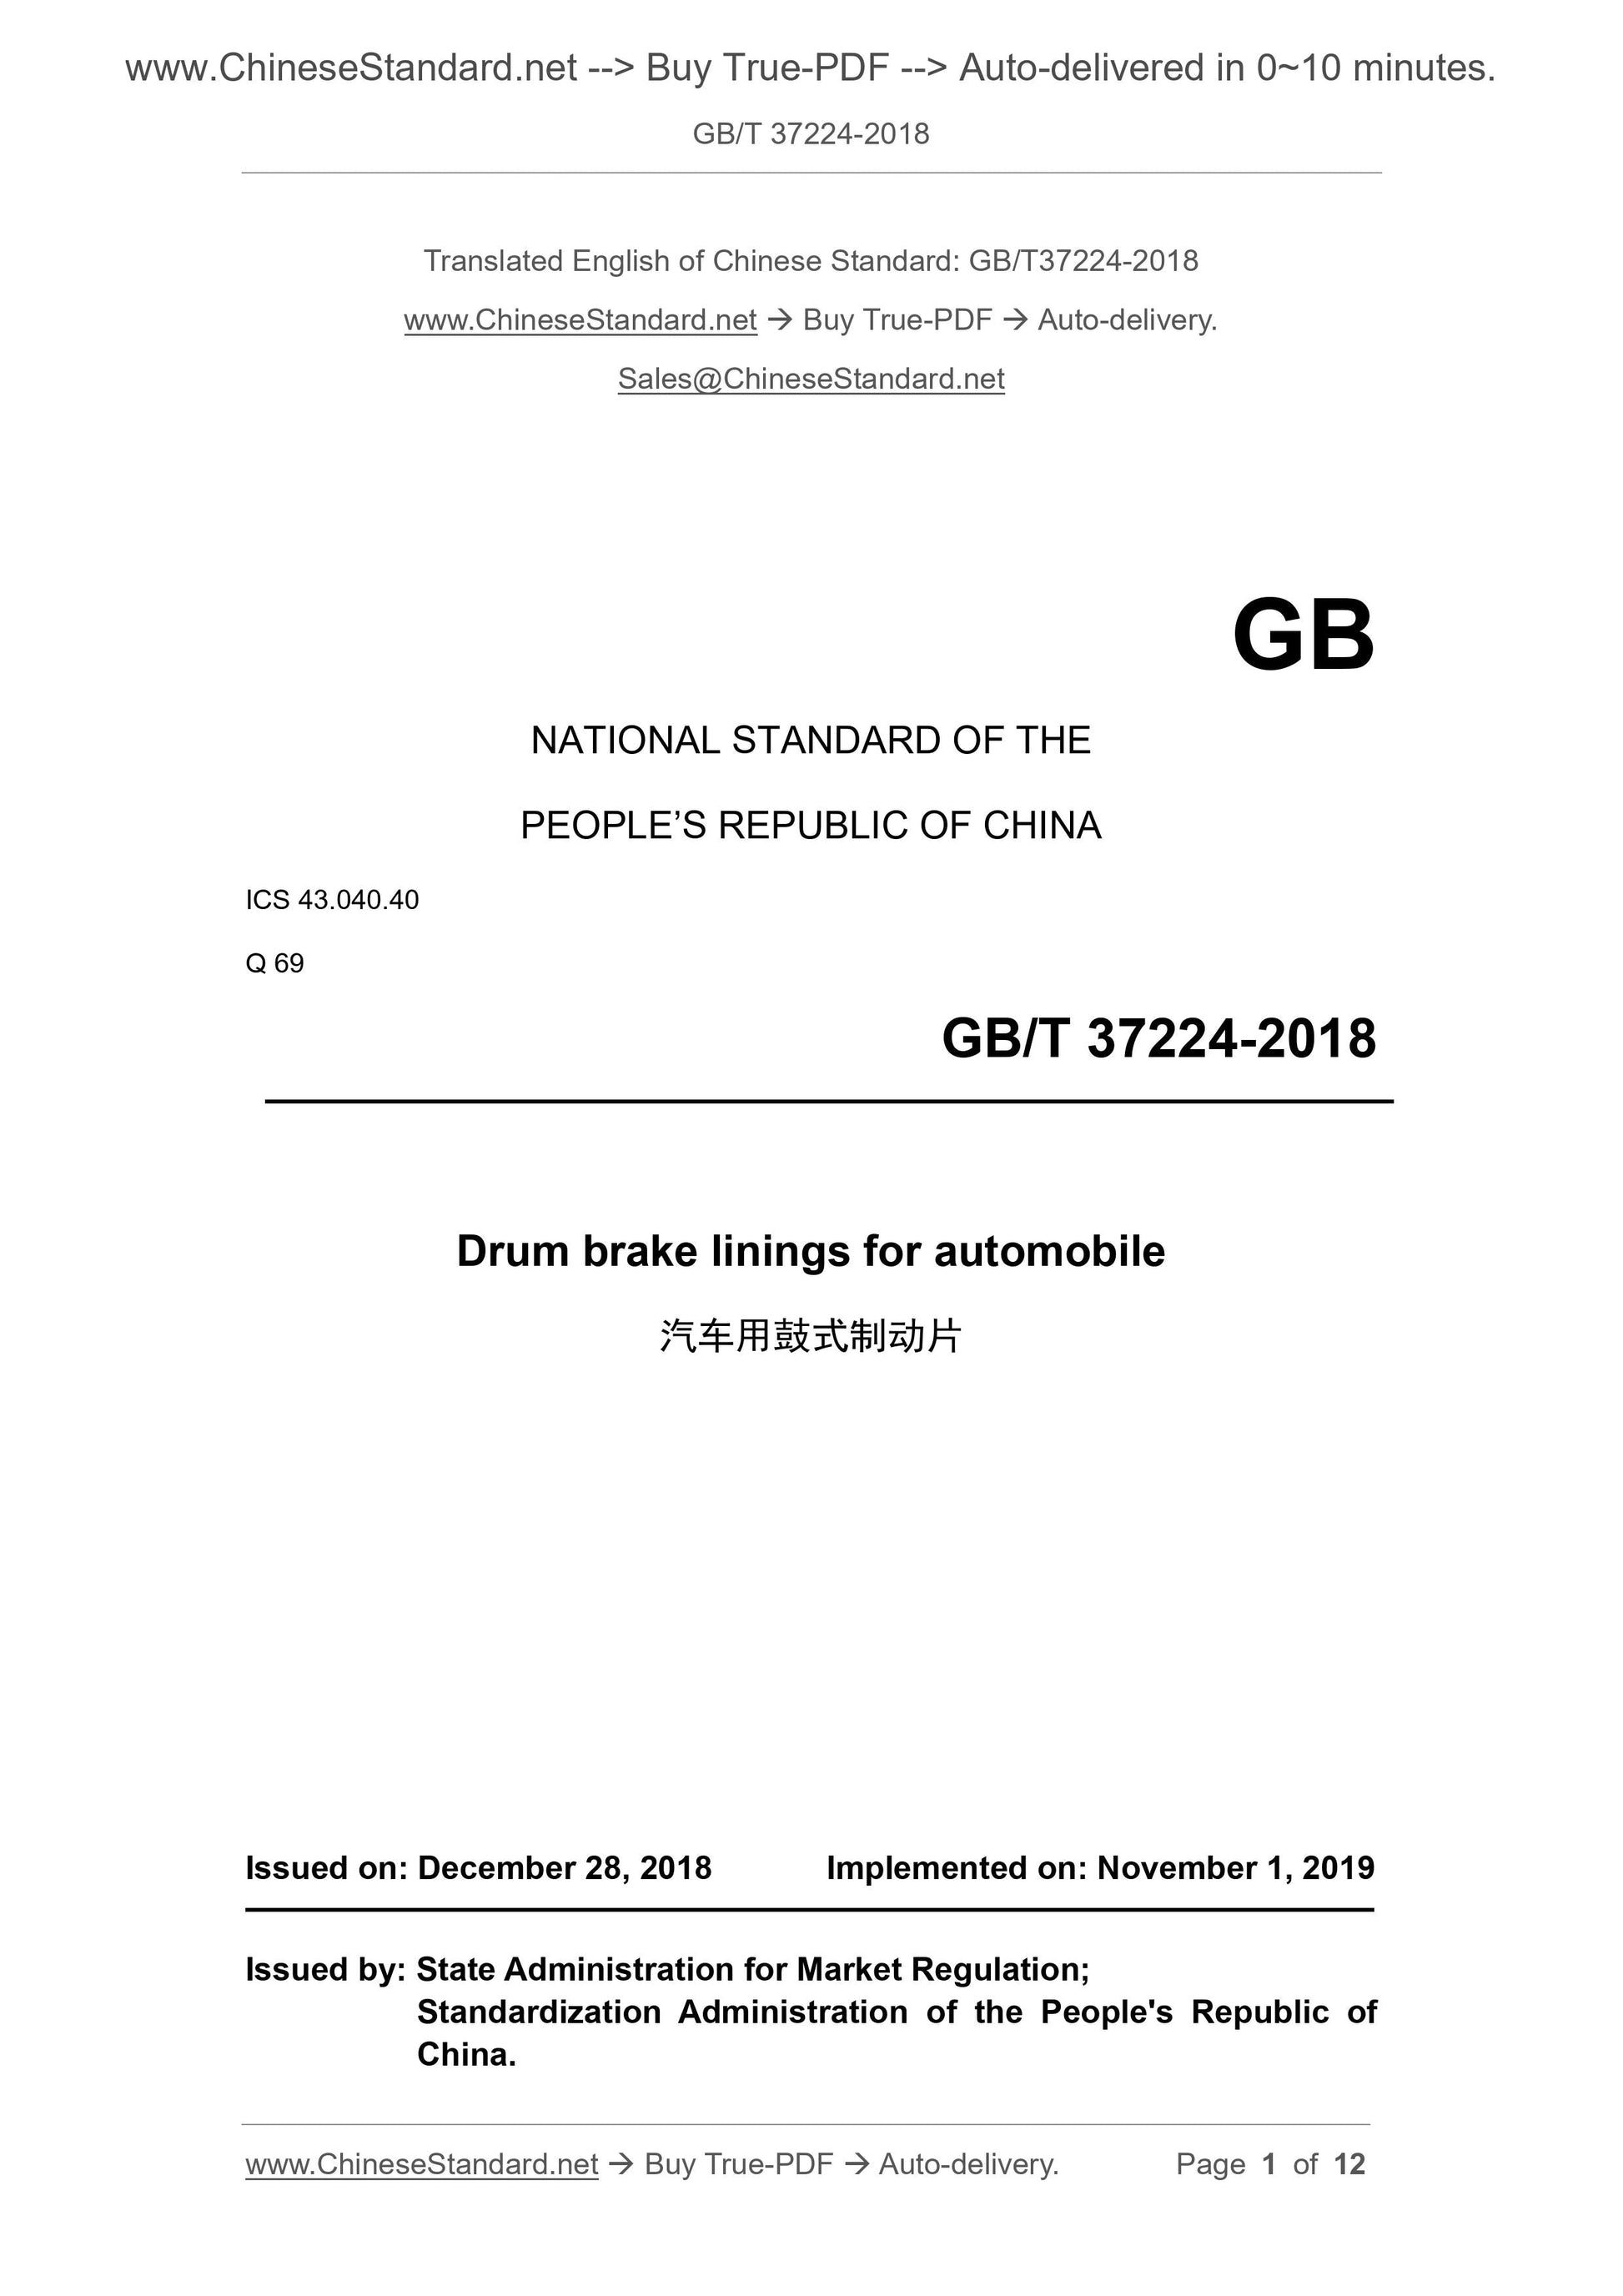 GB/T 37224-2018 Page 1